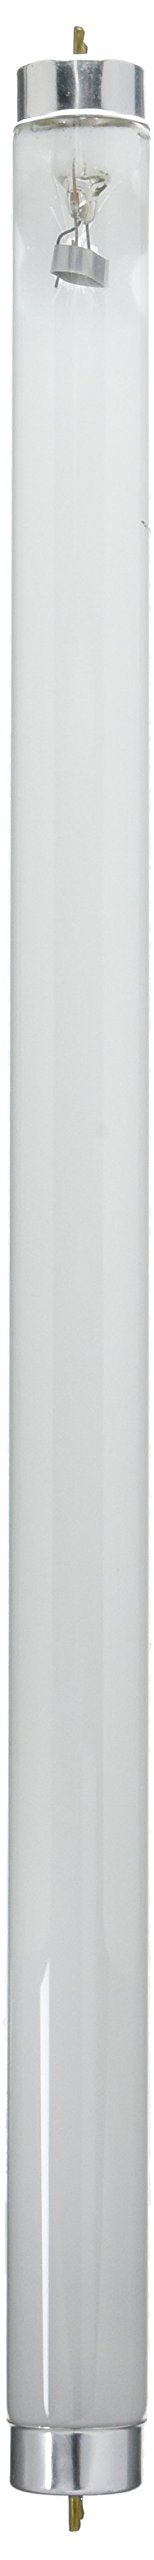 Camco 54877 Fluorescent Bulb-Cool White, 1 Pack